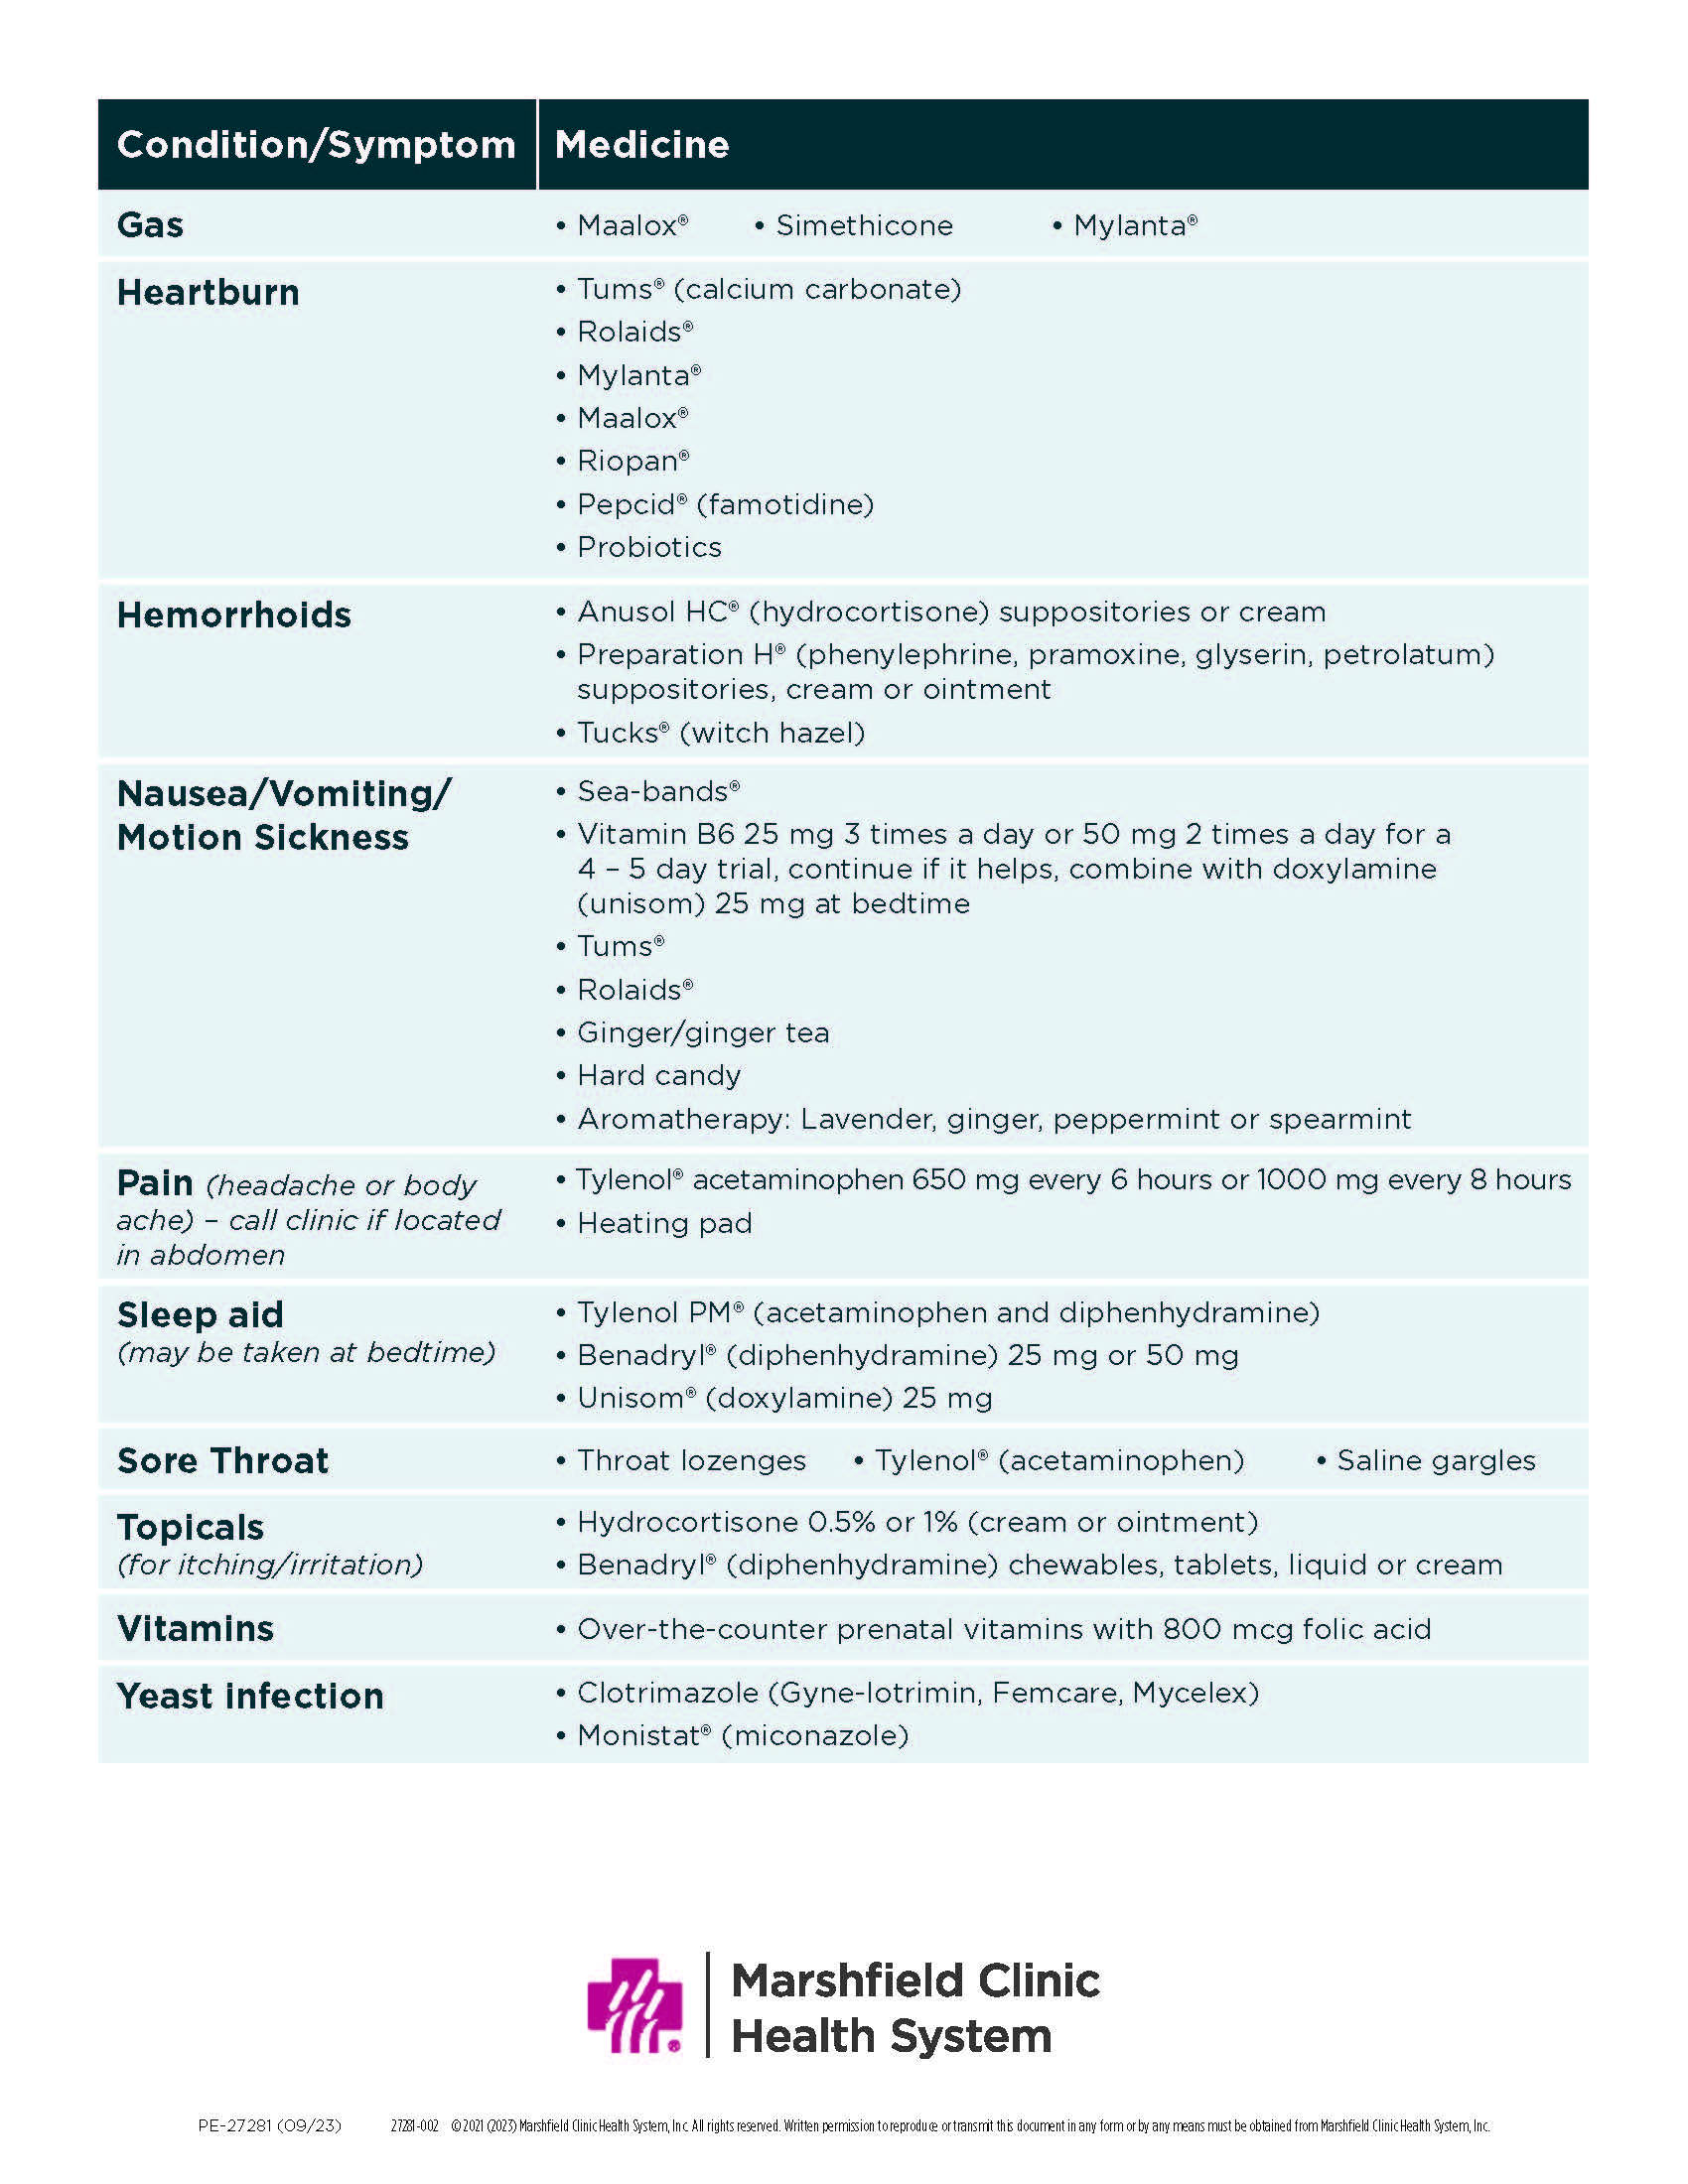 Second Graphic of safe medications during pregnancy 2